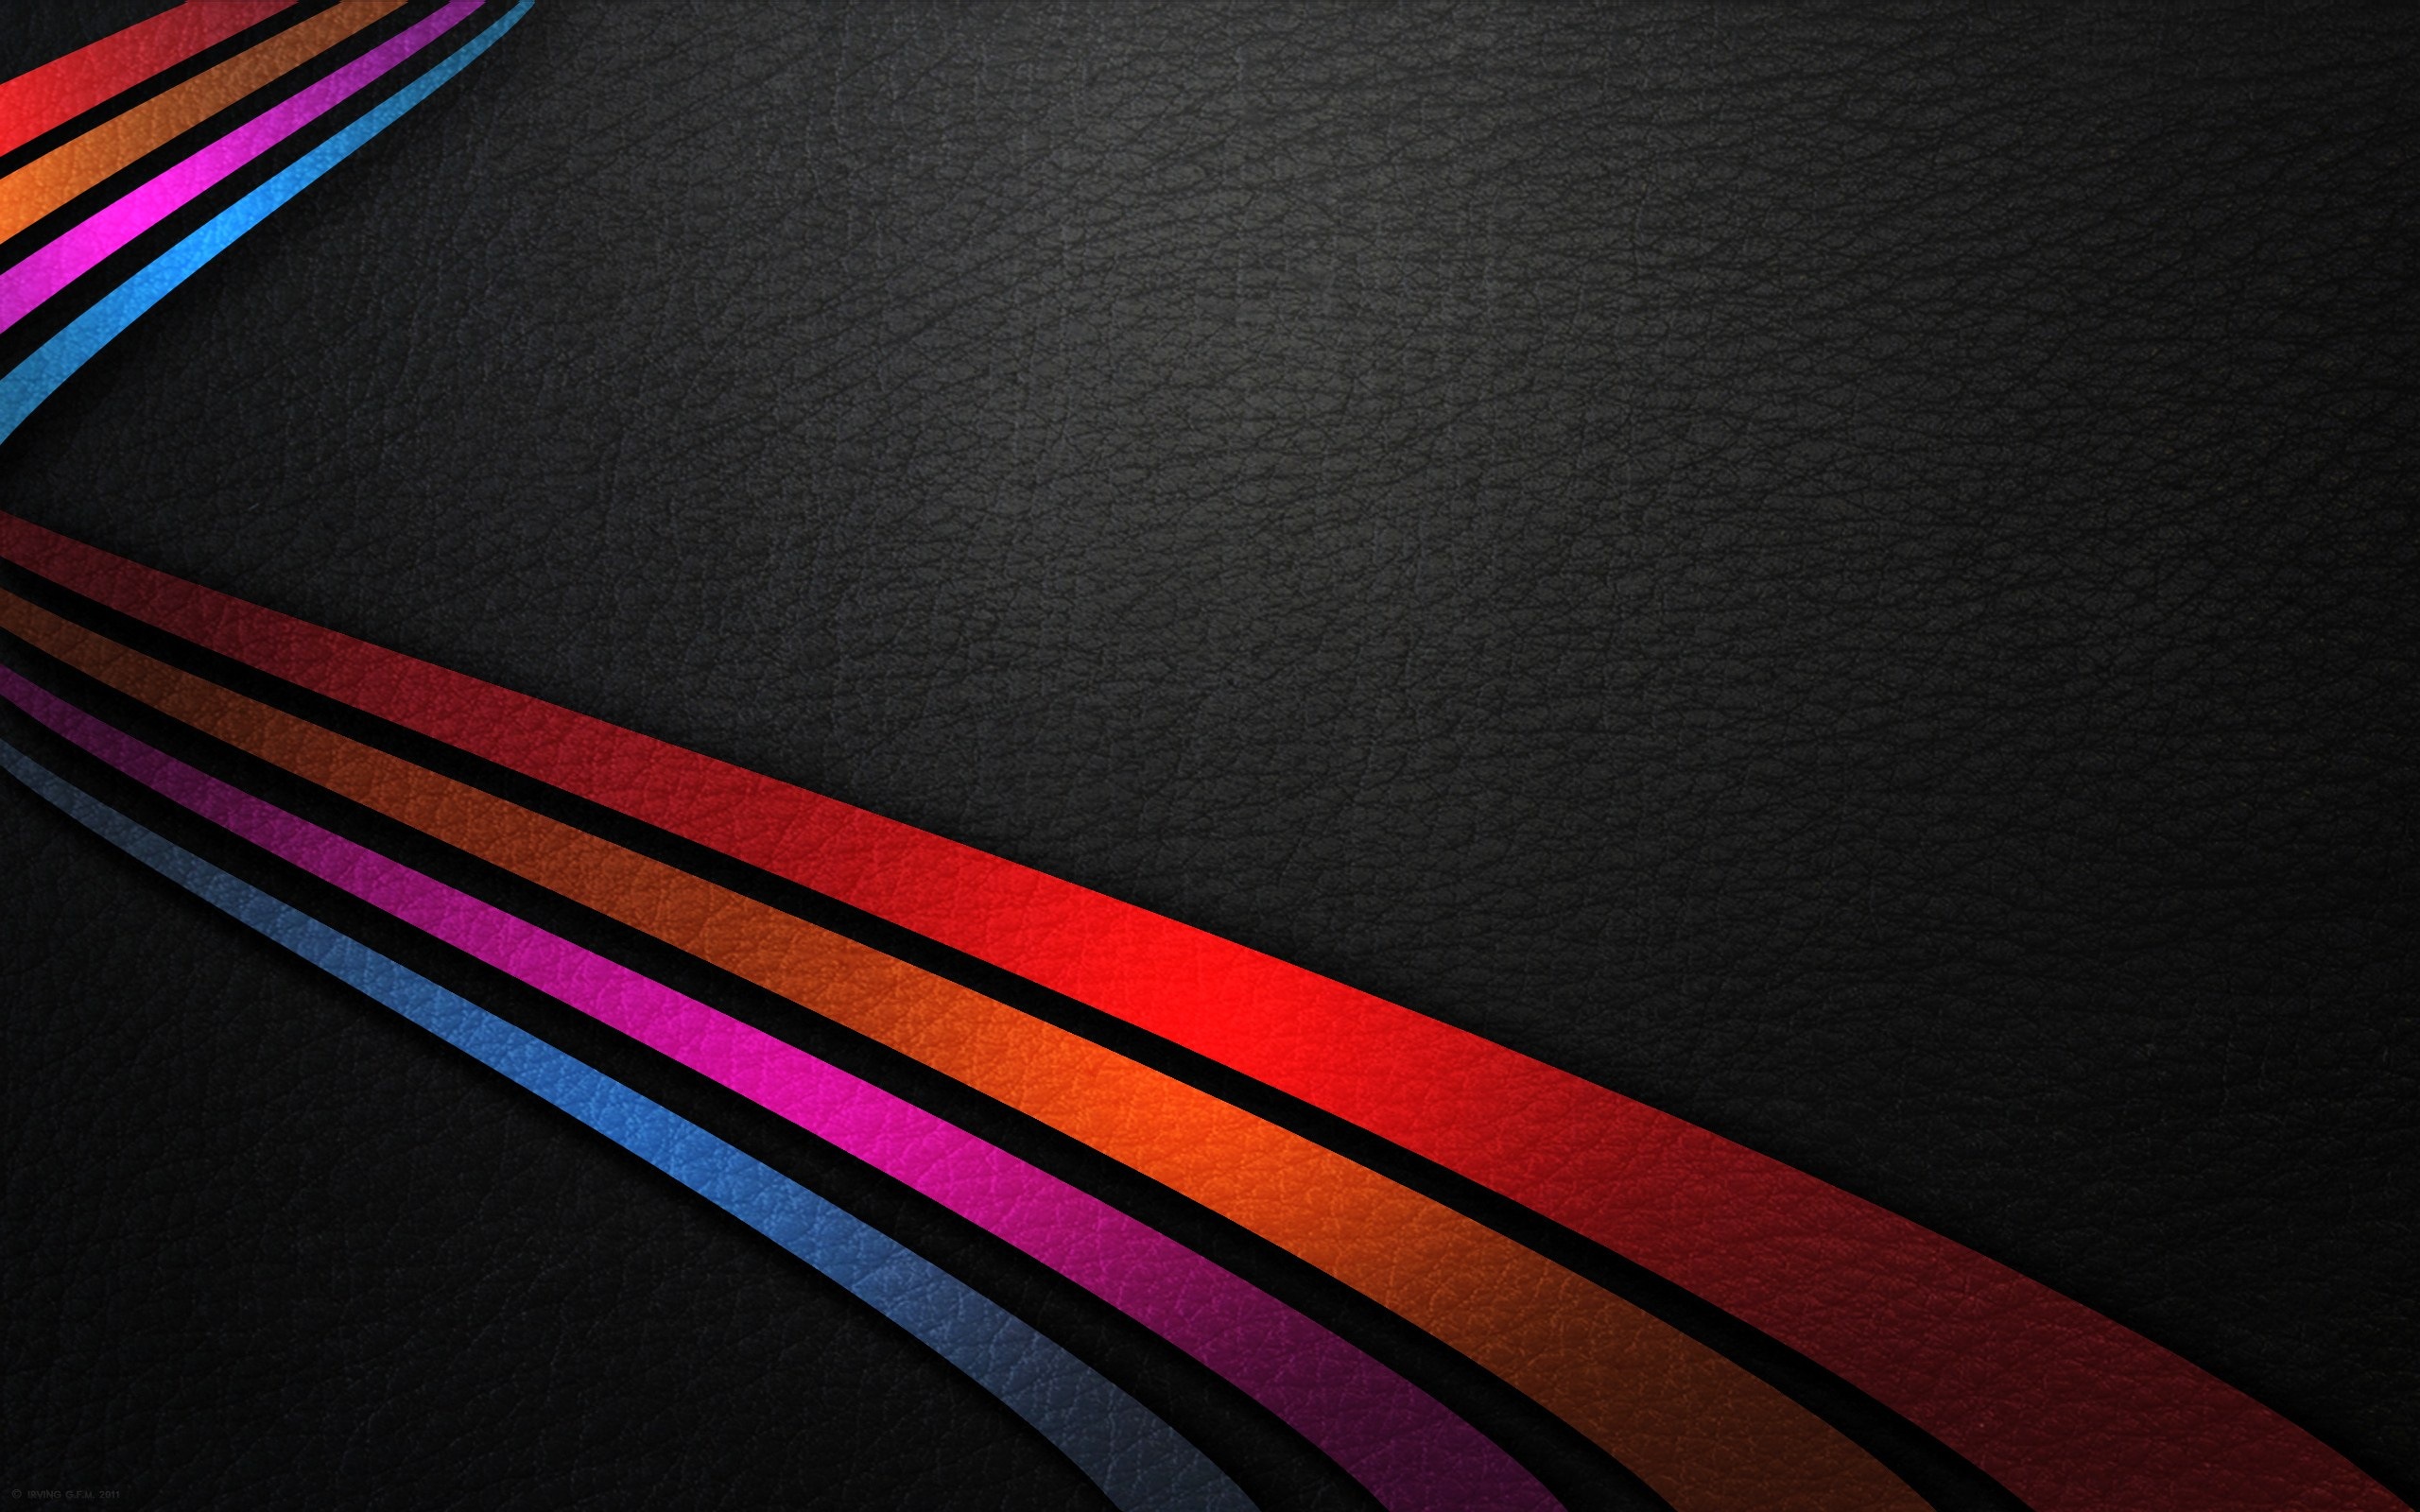 Lines of Colour HD Wallpaper - High Definition, High Resolution HD  Wallpapers : High Definition, High Resolution HD Wallpapers